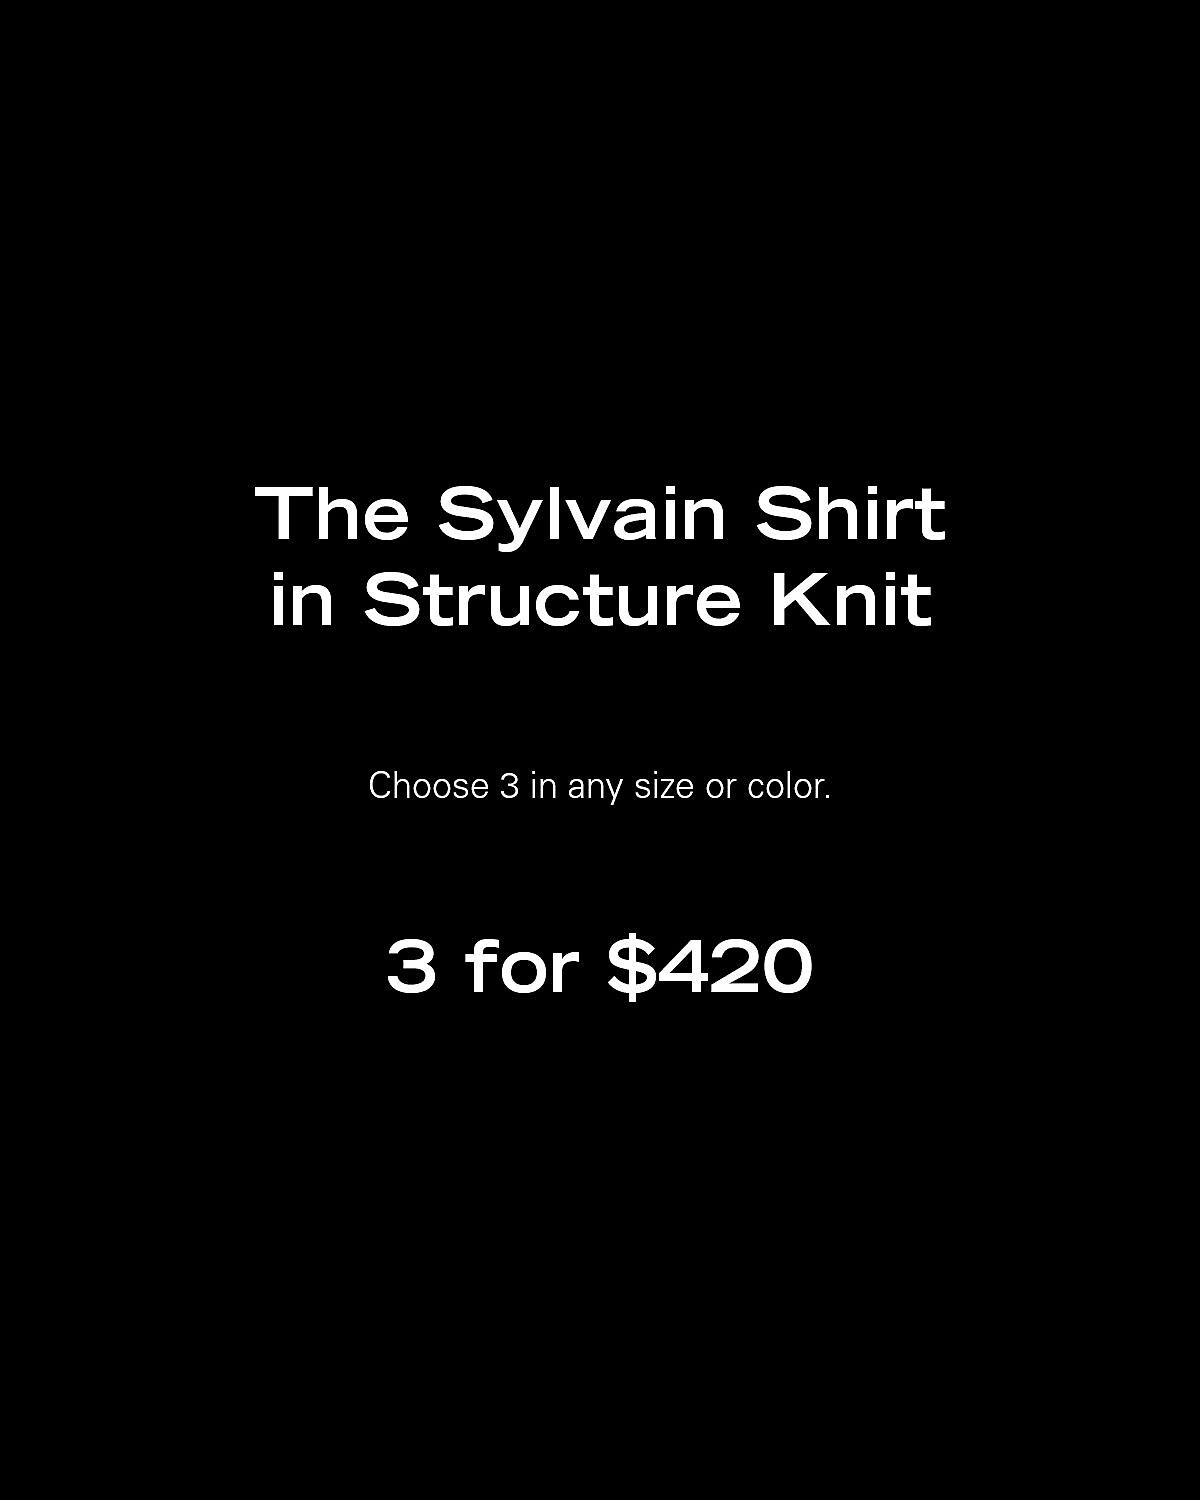 The Sylvain Shirt in Structure Knit